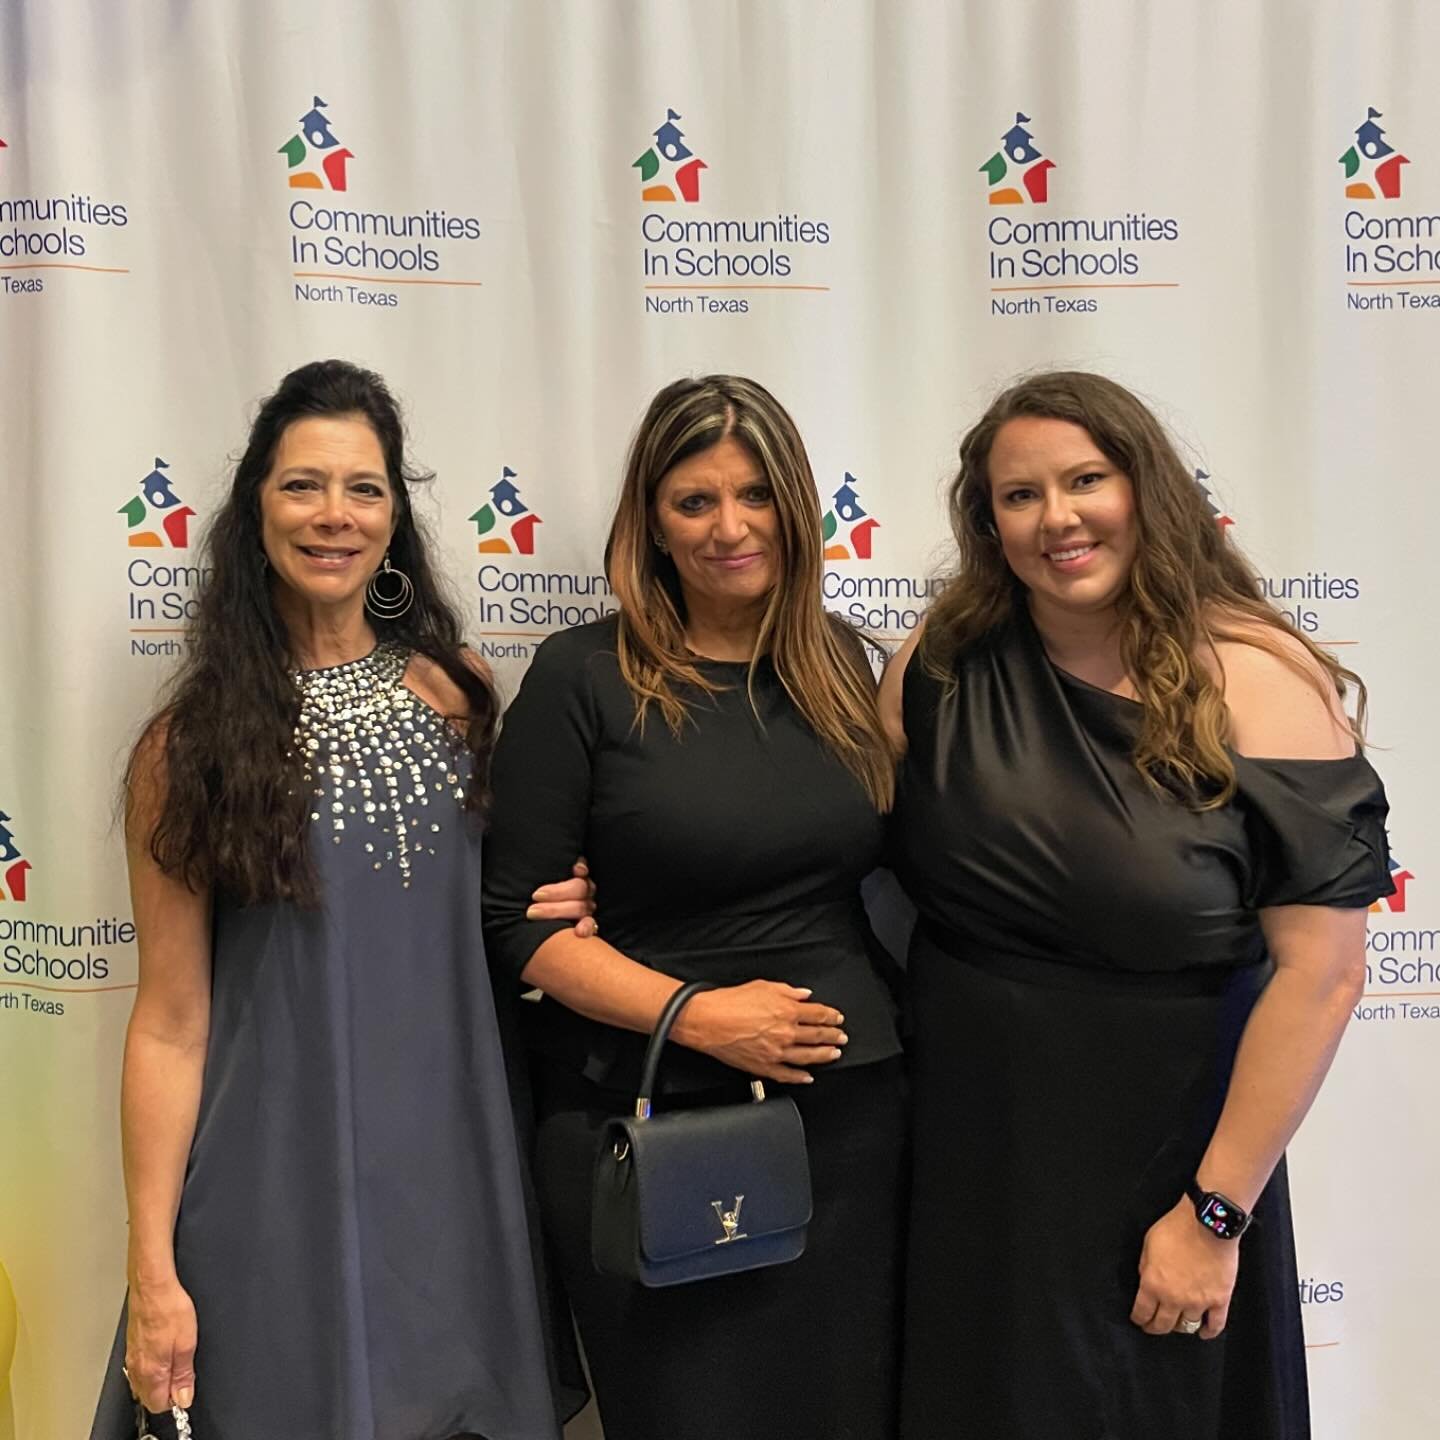 A few of The Wendi Atwood Rogers Foundation board members had a blast at the annual gala for @cisnorthtexas . It is amazing to see what hard work and resources can do to better a community! We feel honored to have connected with Communities in School